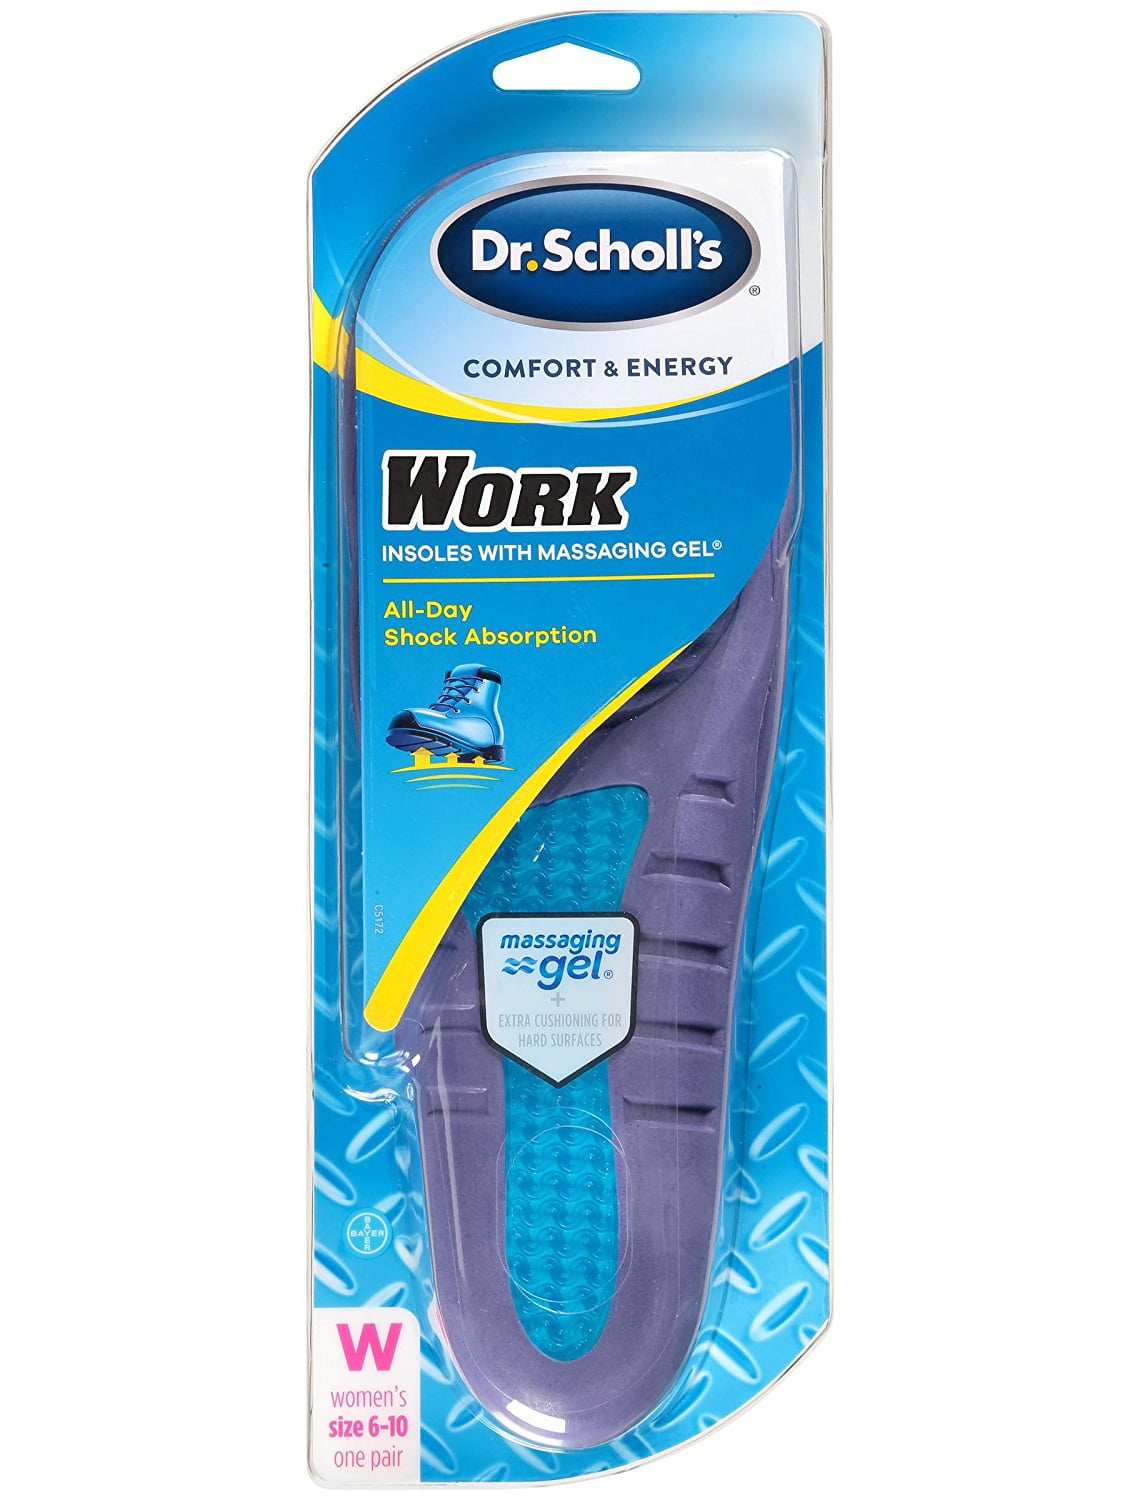 Dr Scholls Comfort and Energy Work Insoles for Women Size 6-10 1 pair Ea 